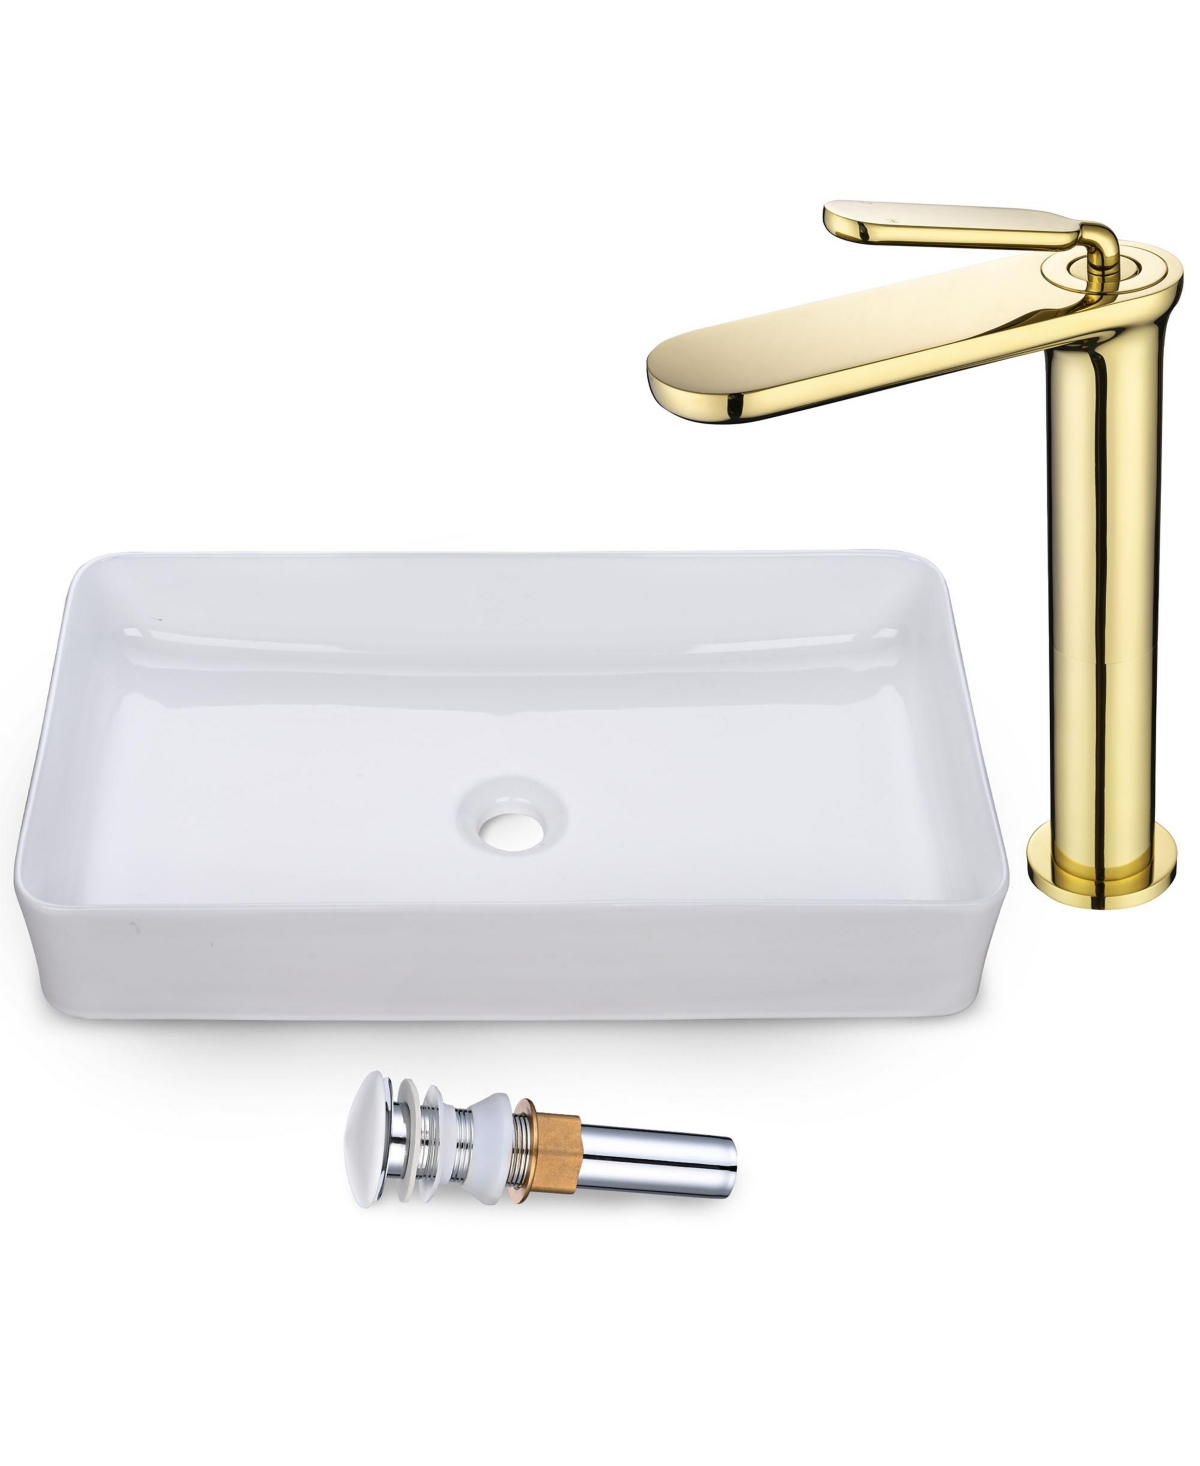 Rectangle Ceramic Bathroom Sink and Gold Vanity Mixer Faucet w/Pop Up Drain Kit - Natural